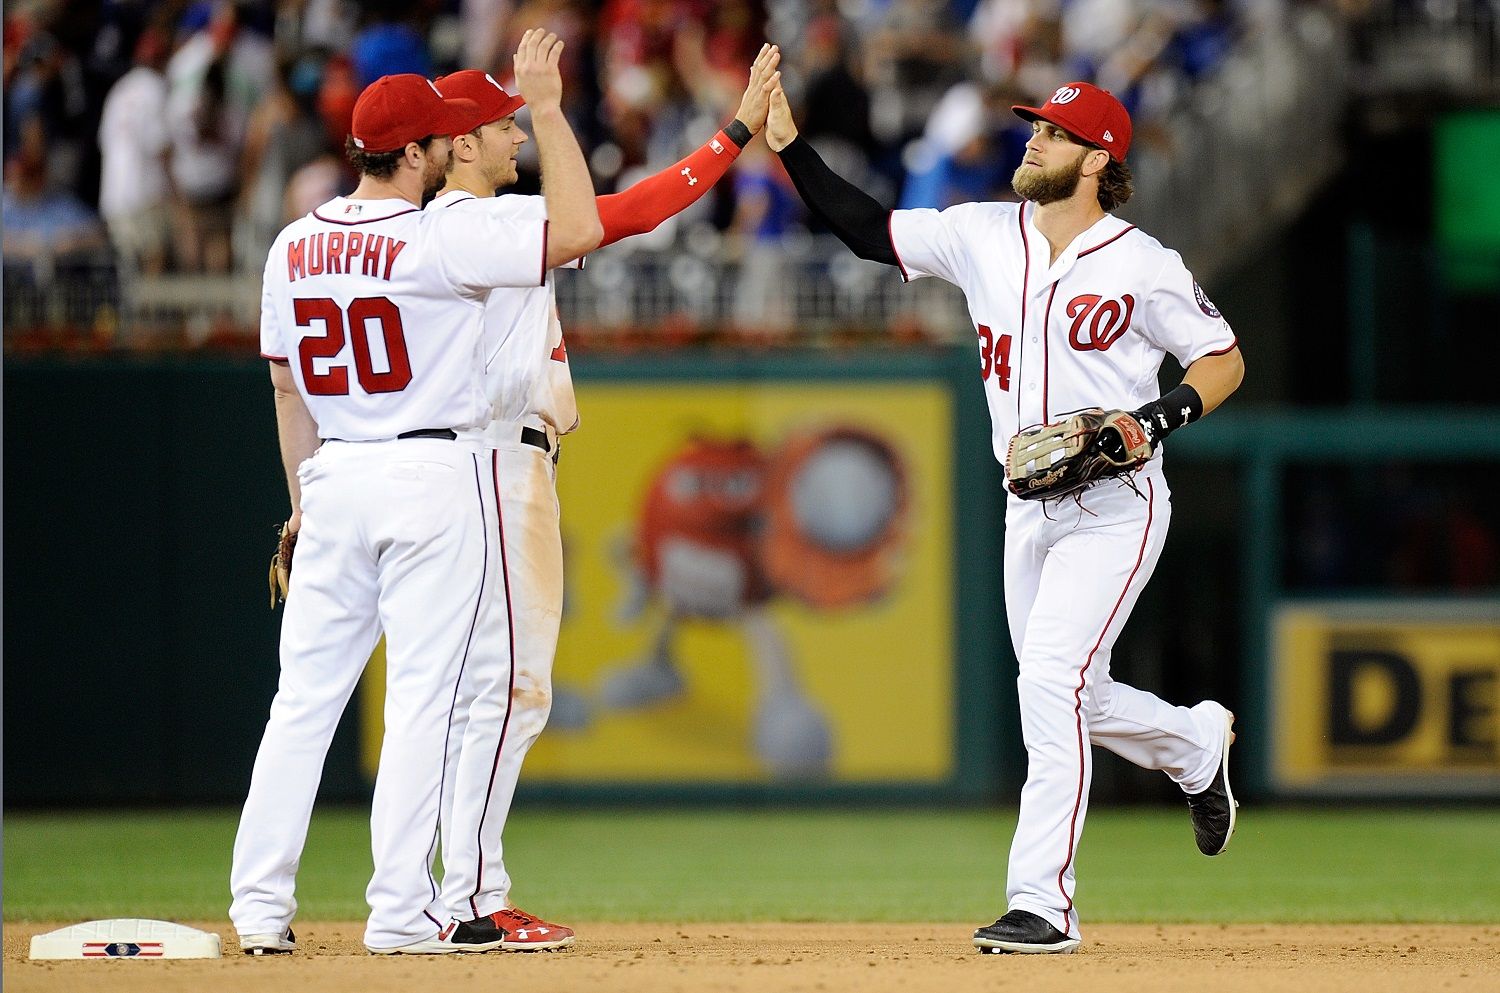 WASHINGTON, DC - JUNE 27: Bryce Harper #34 of the Washington Nationals celebrates with Trea Turner #7 and Daniel Murphy #20 after a 6-1 victory against the Chicago Cubs at Nationals Park on June 27, 2017 in Washington, DC.  (Photo by Greg Fiume/Getty Images)